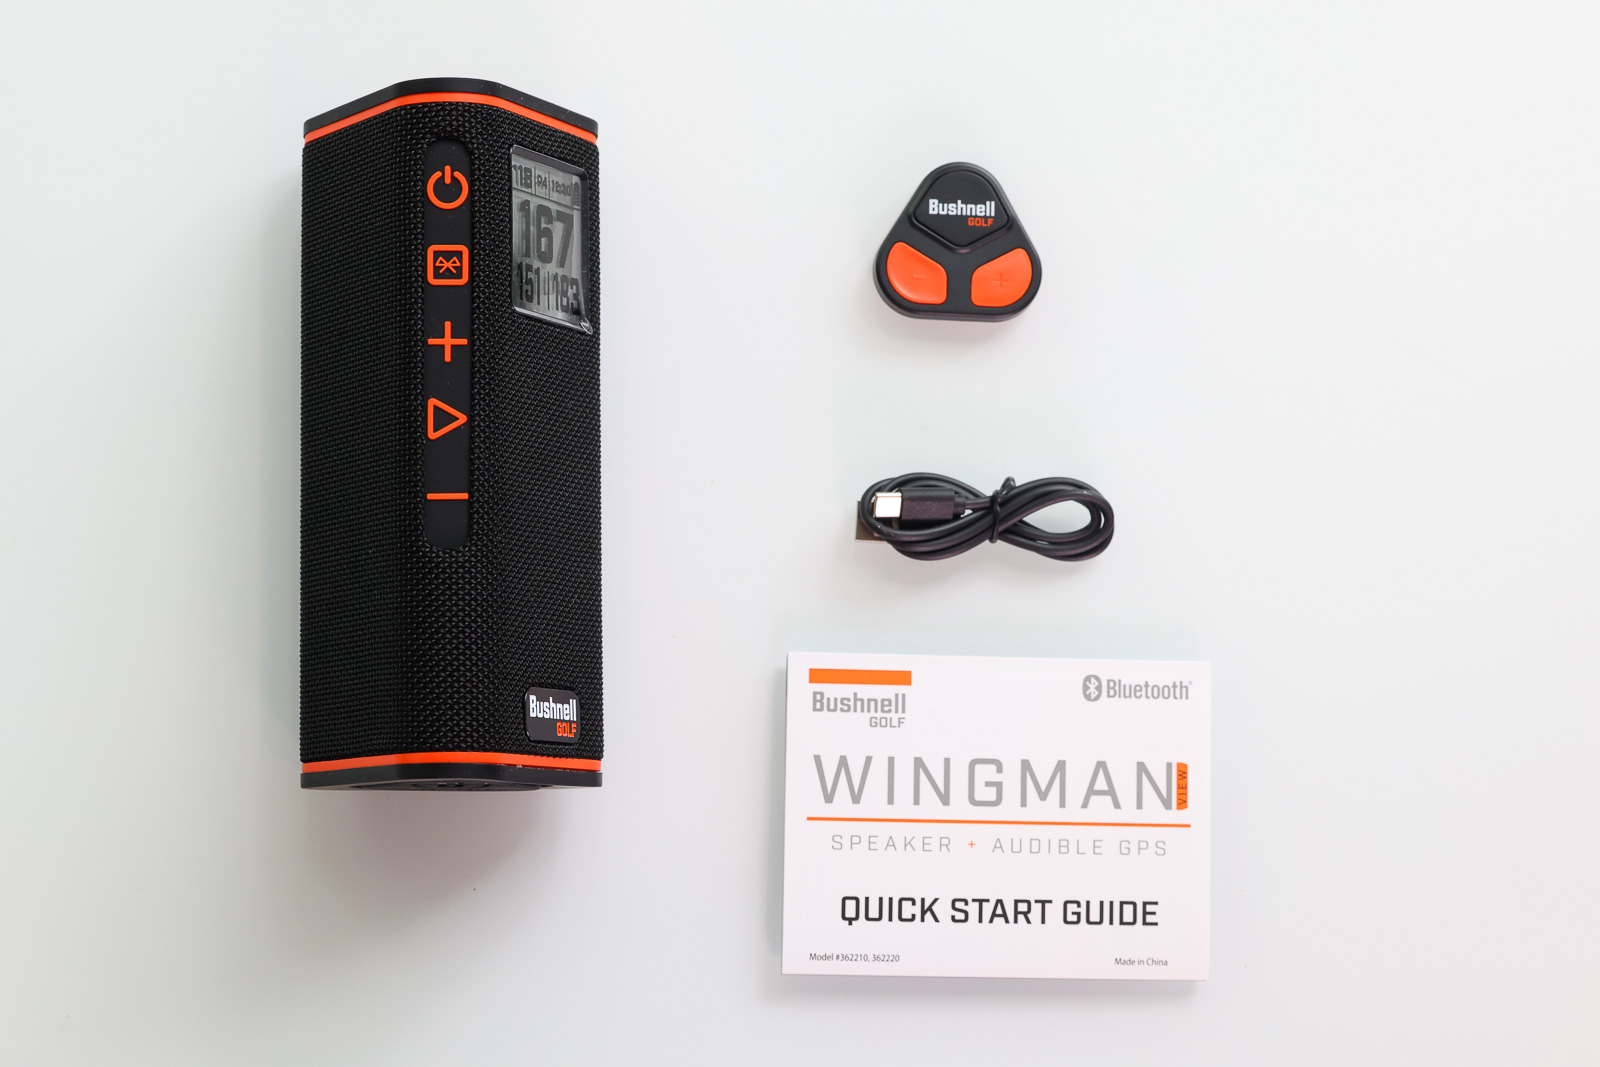 Bushnell Wingman View: What's in the Box?